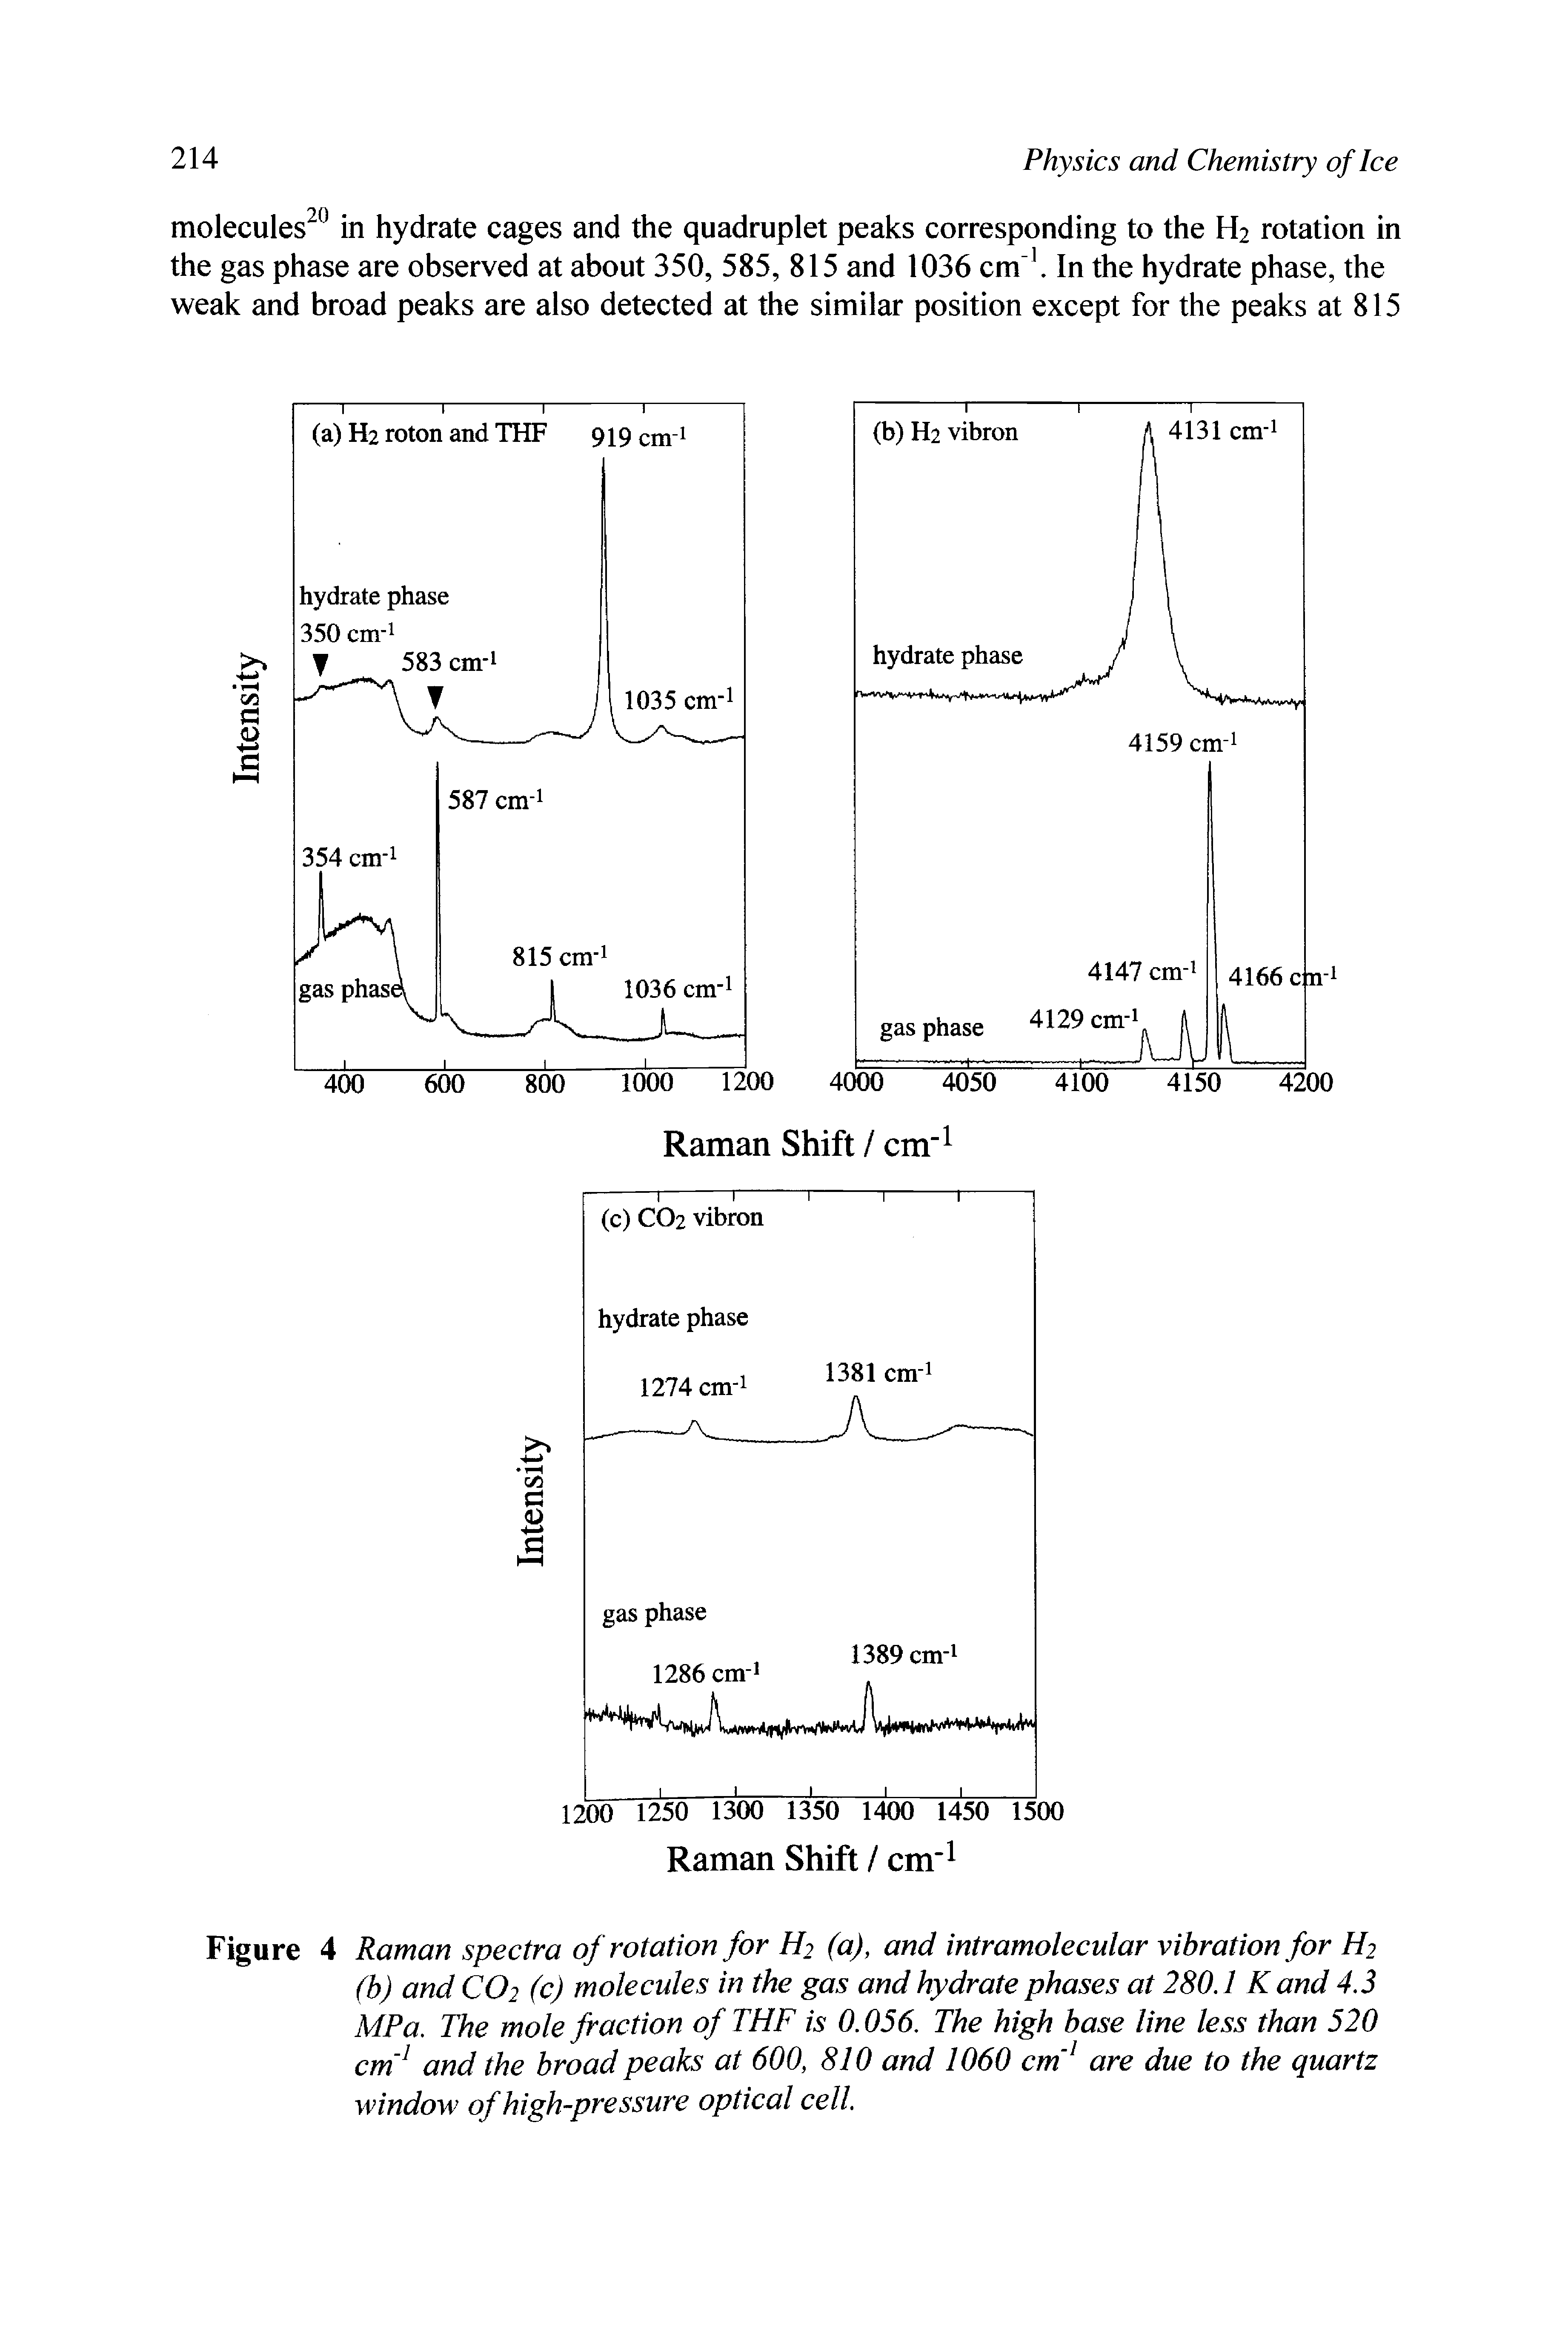 Figure 4 Raman spectra of rotation for H2 (a), and intramolecular vibration for H2 (b) and CO2 (c) molecules in the gas and hydrate phases at 280.1 K and 4.3 MPa. The mole fraction of THF is 0.056. The high base line less than 520 cm and the broad peaks at 600, 810 and 1060 cm are due to the quartz window of high-pressure optical cell.